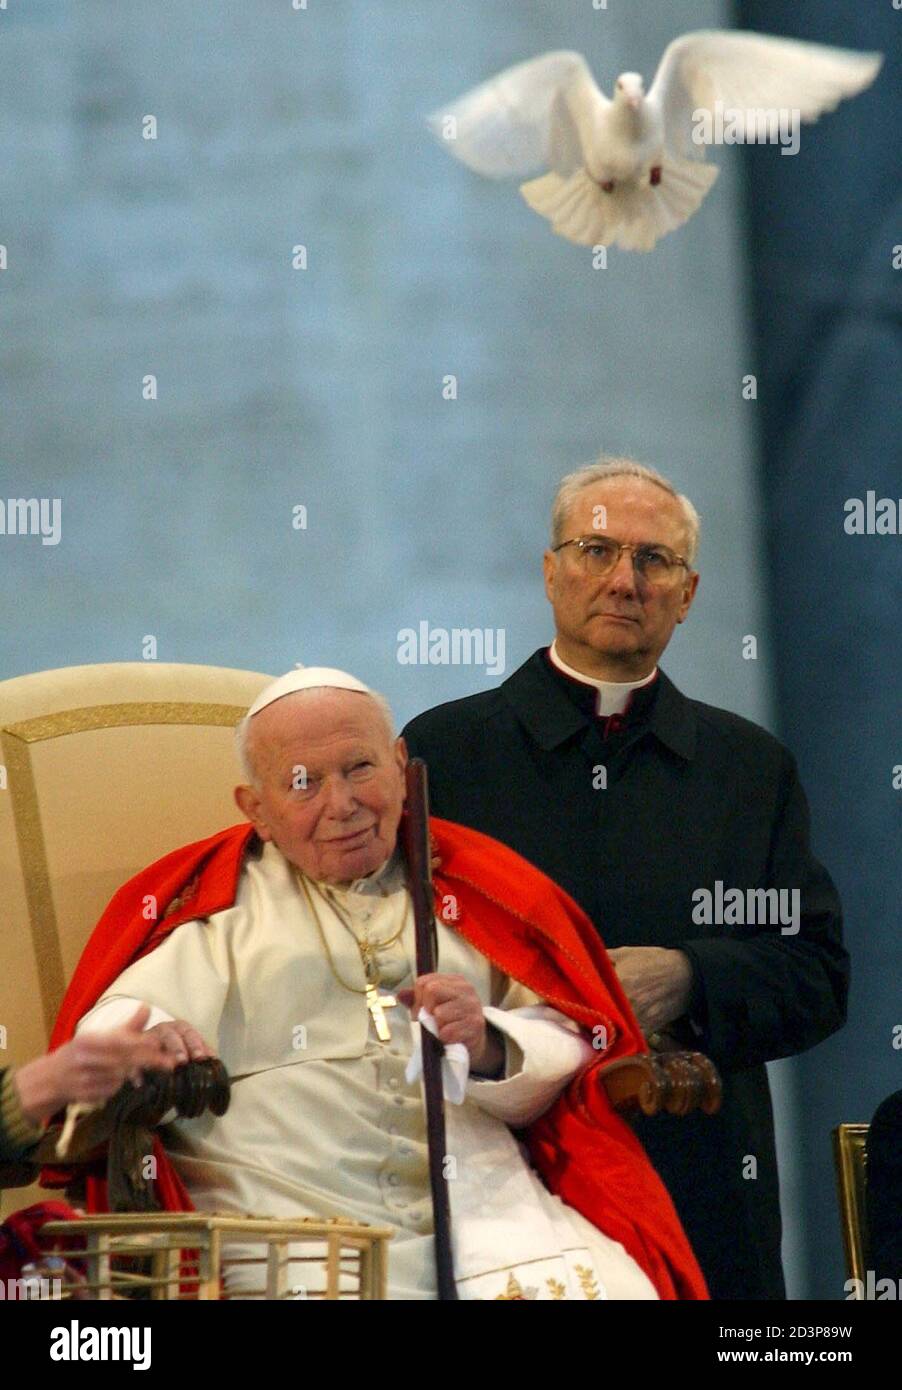 A doves flies over Pope John Paul II during his meeting with young people  in Saint Peter's Square at the Vatican April 10, 2003. The pontiff said  youth have to promote the